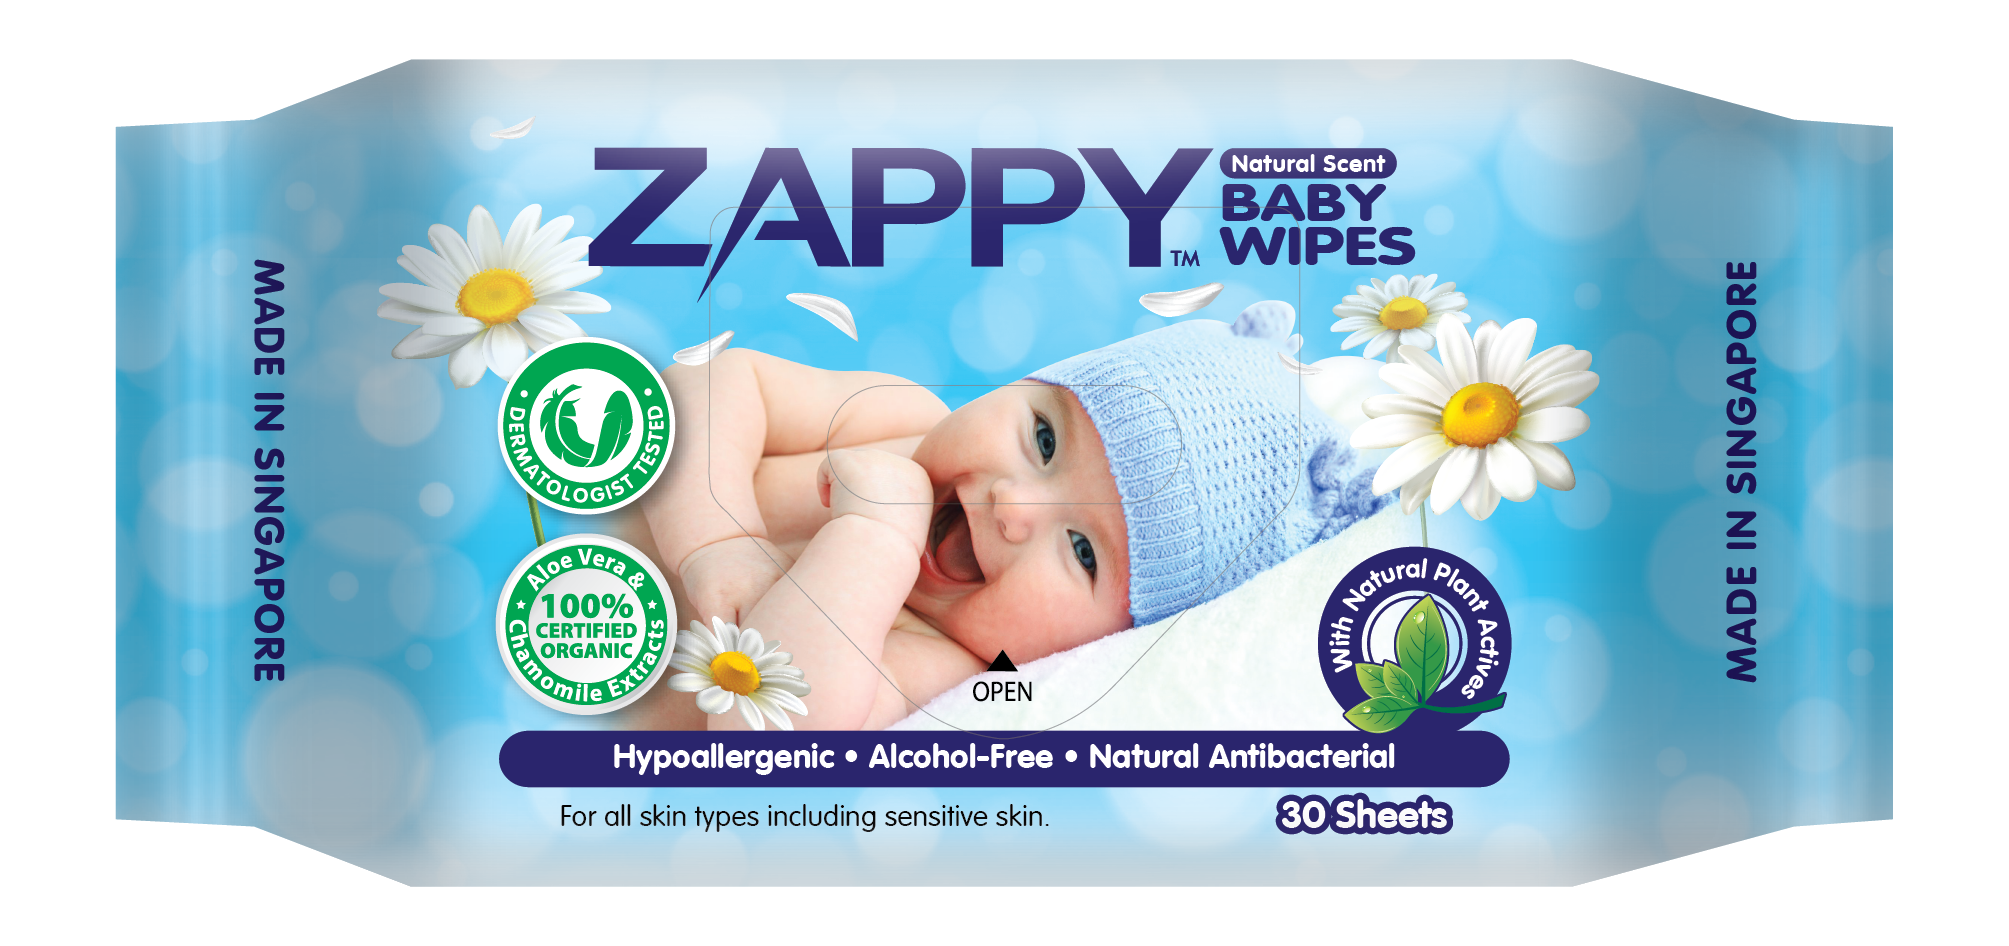 ZAPPY BABY WIPES (SCENTED)
24 packets X 80 sheets + 24 packets X 30 sheets